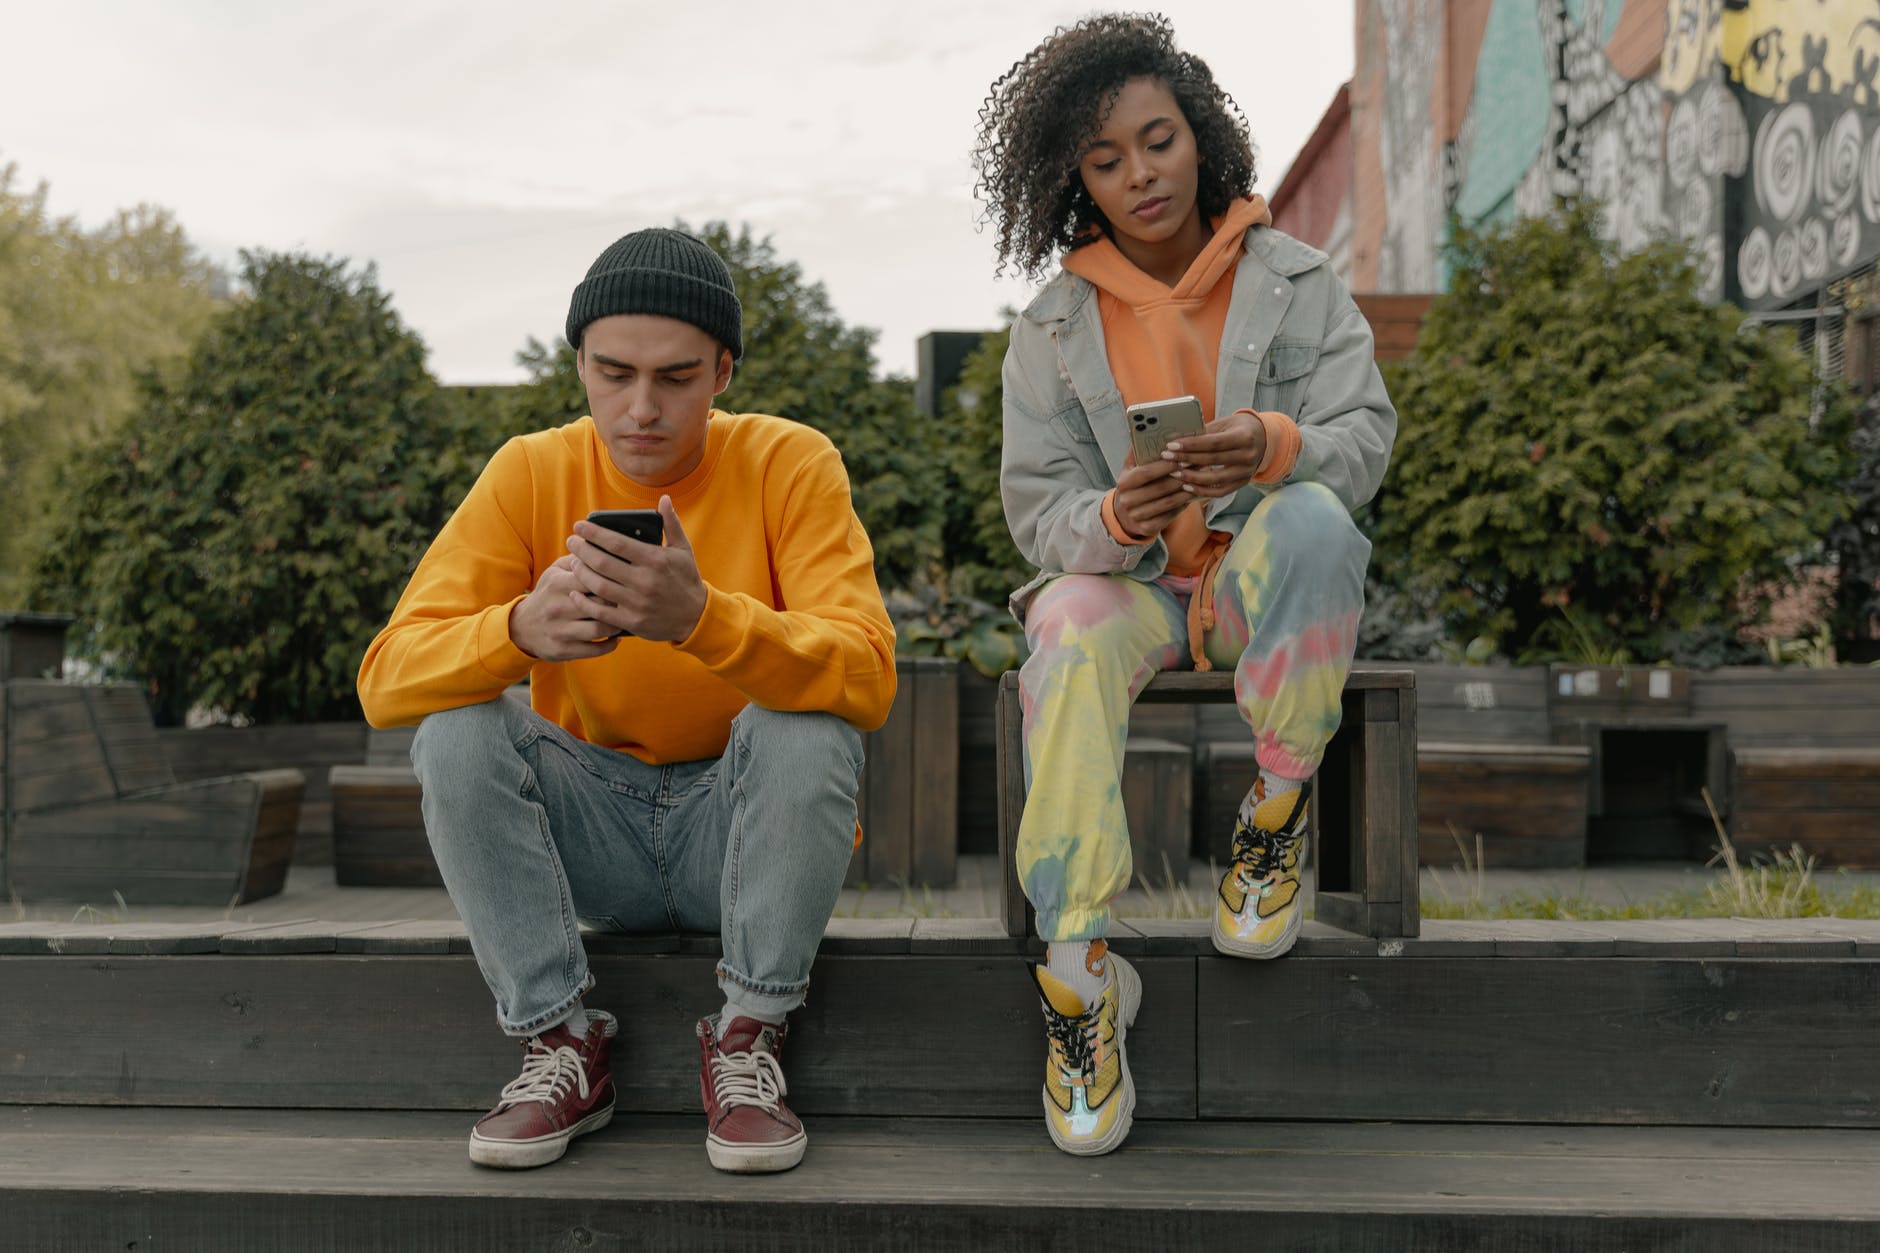 a man and a woman siting on a wooden platform holding smartphones